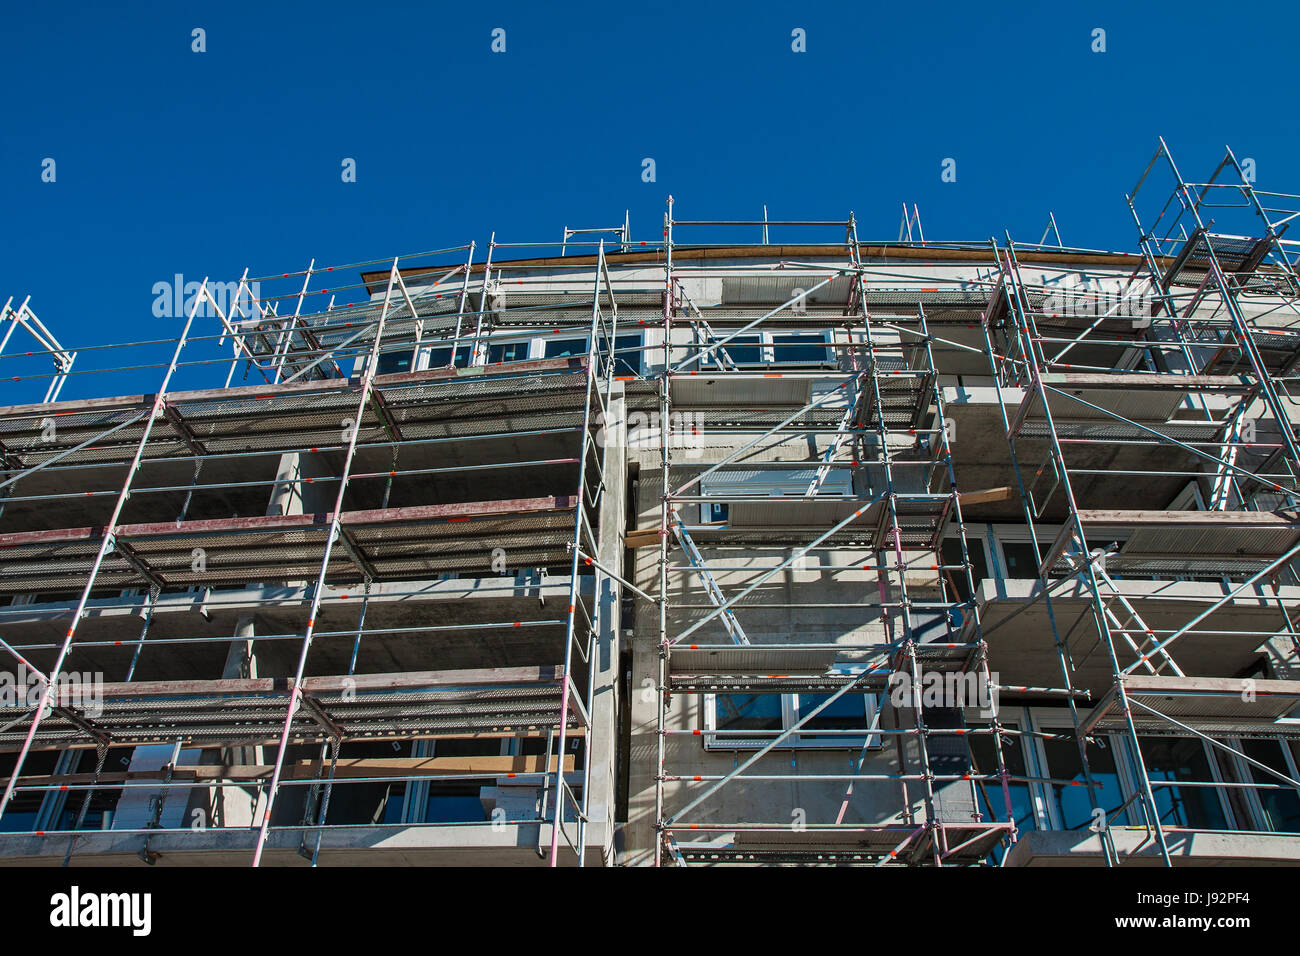 blue, engineering, style of construction, architecture, architectural style, Stock Photo